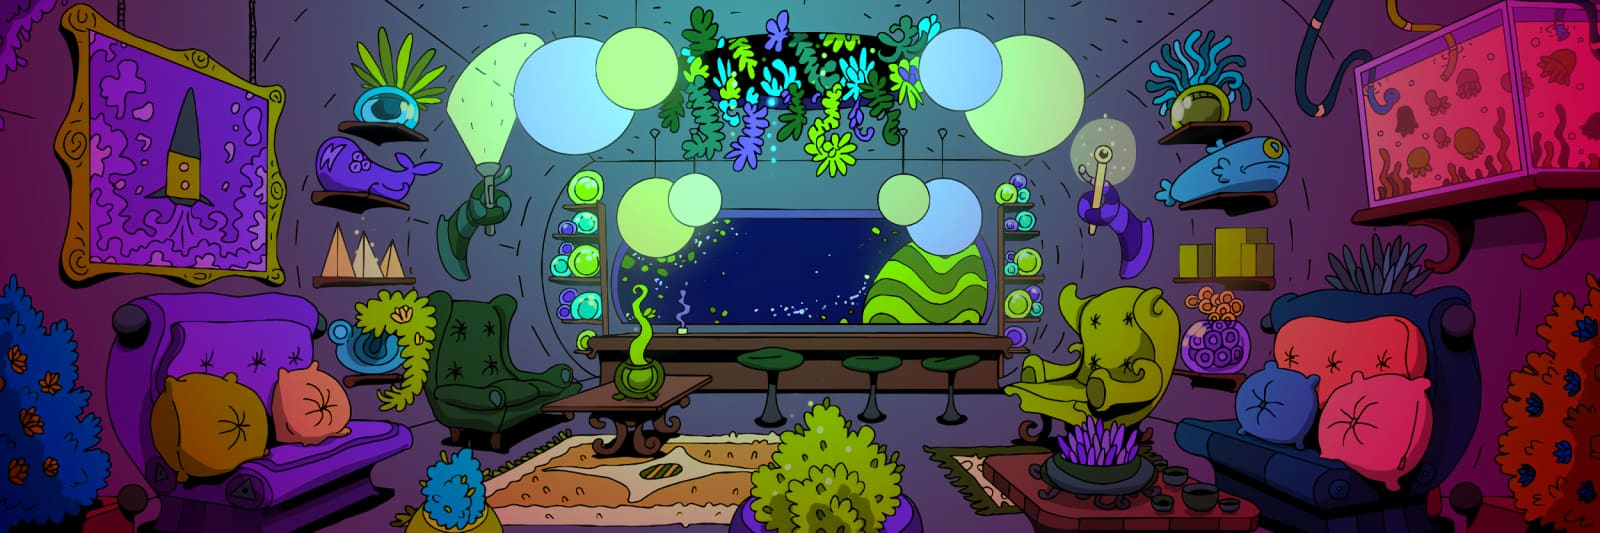 Lonely Alien Space Club